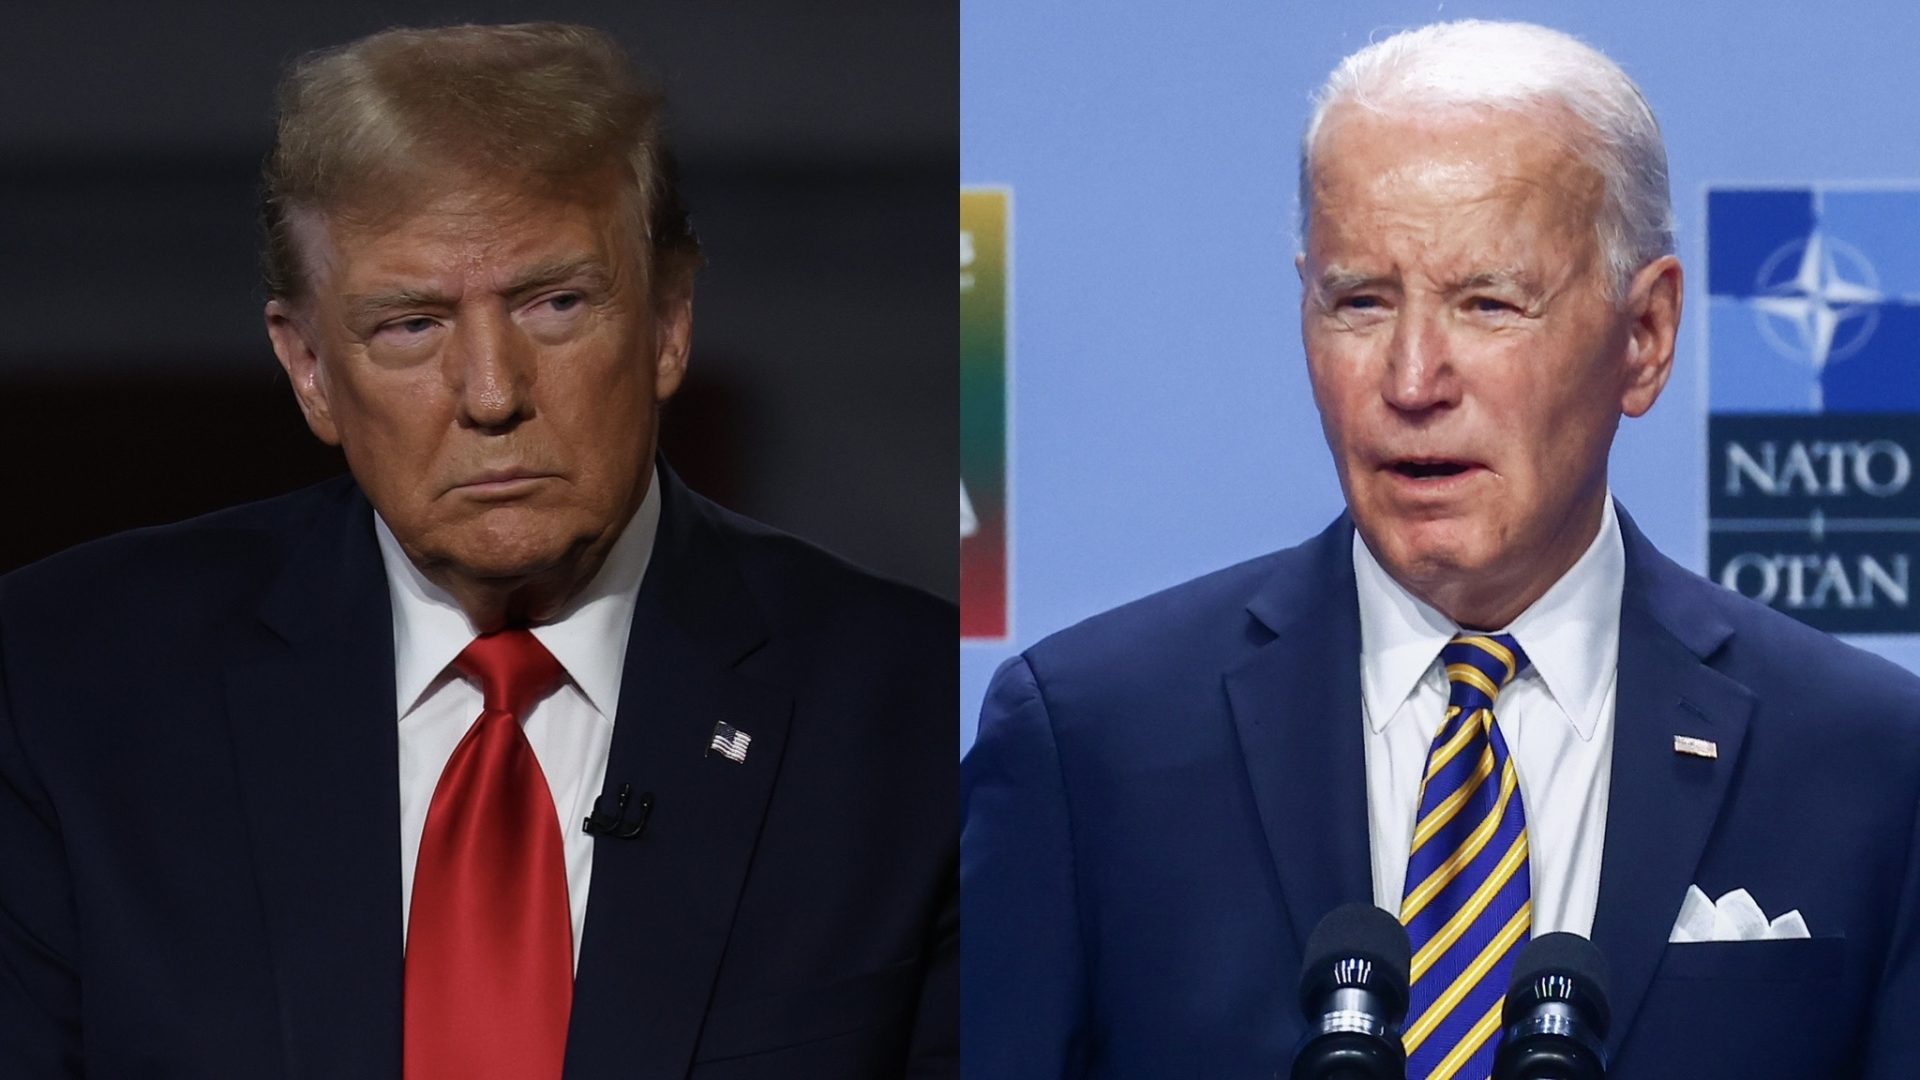 Donald Trump Has The Internet Cuttin’ Up After Trolling President Biden With Shady Video Post (Watch) thumbnail